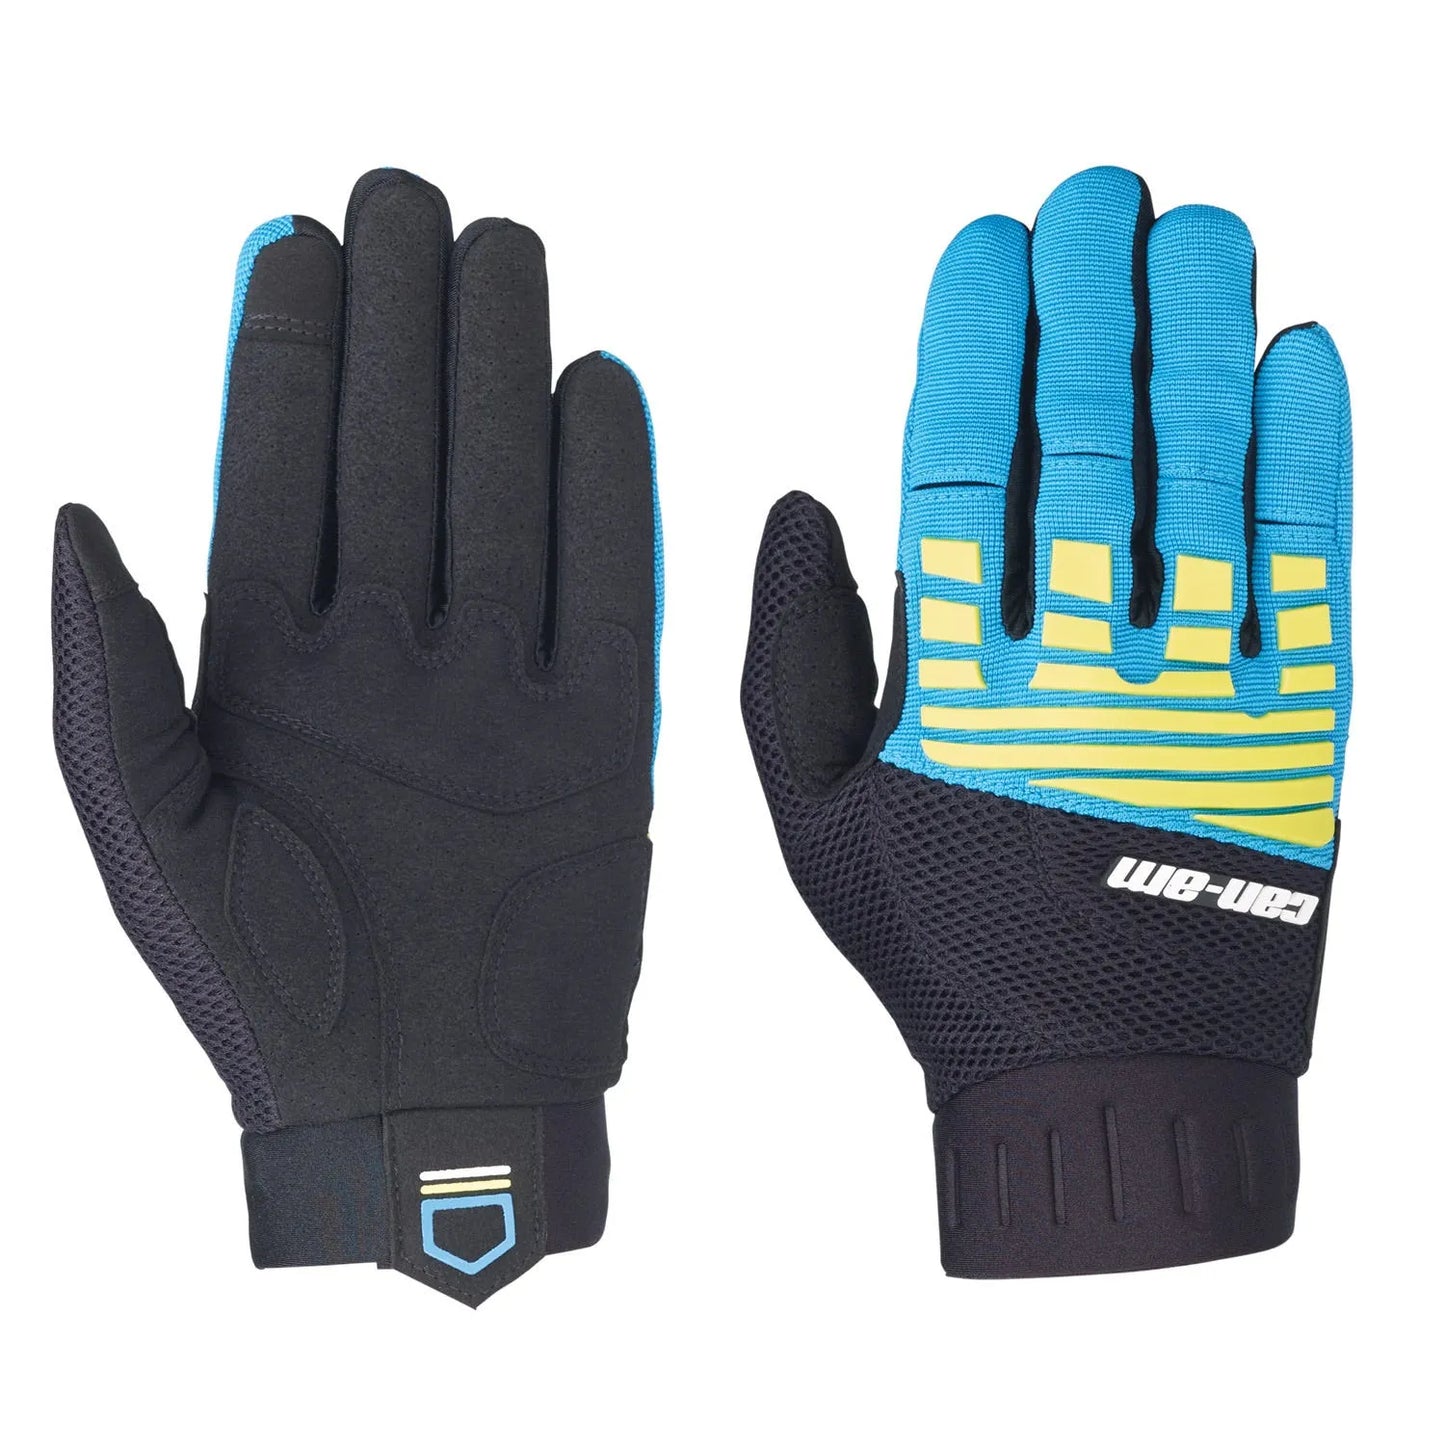 CAN-AM UNISEX STEER GLOVES